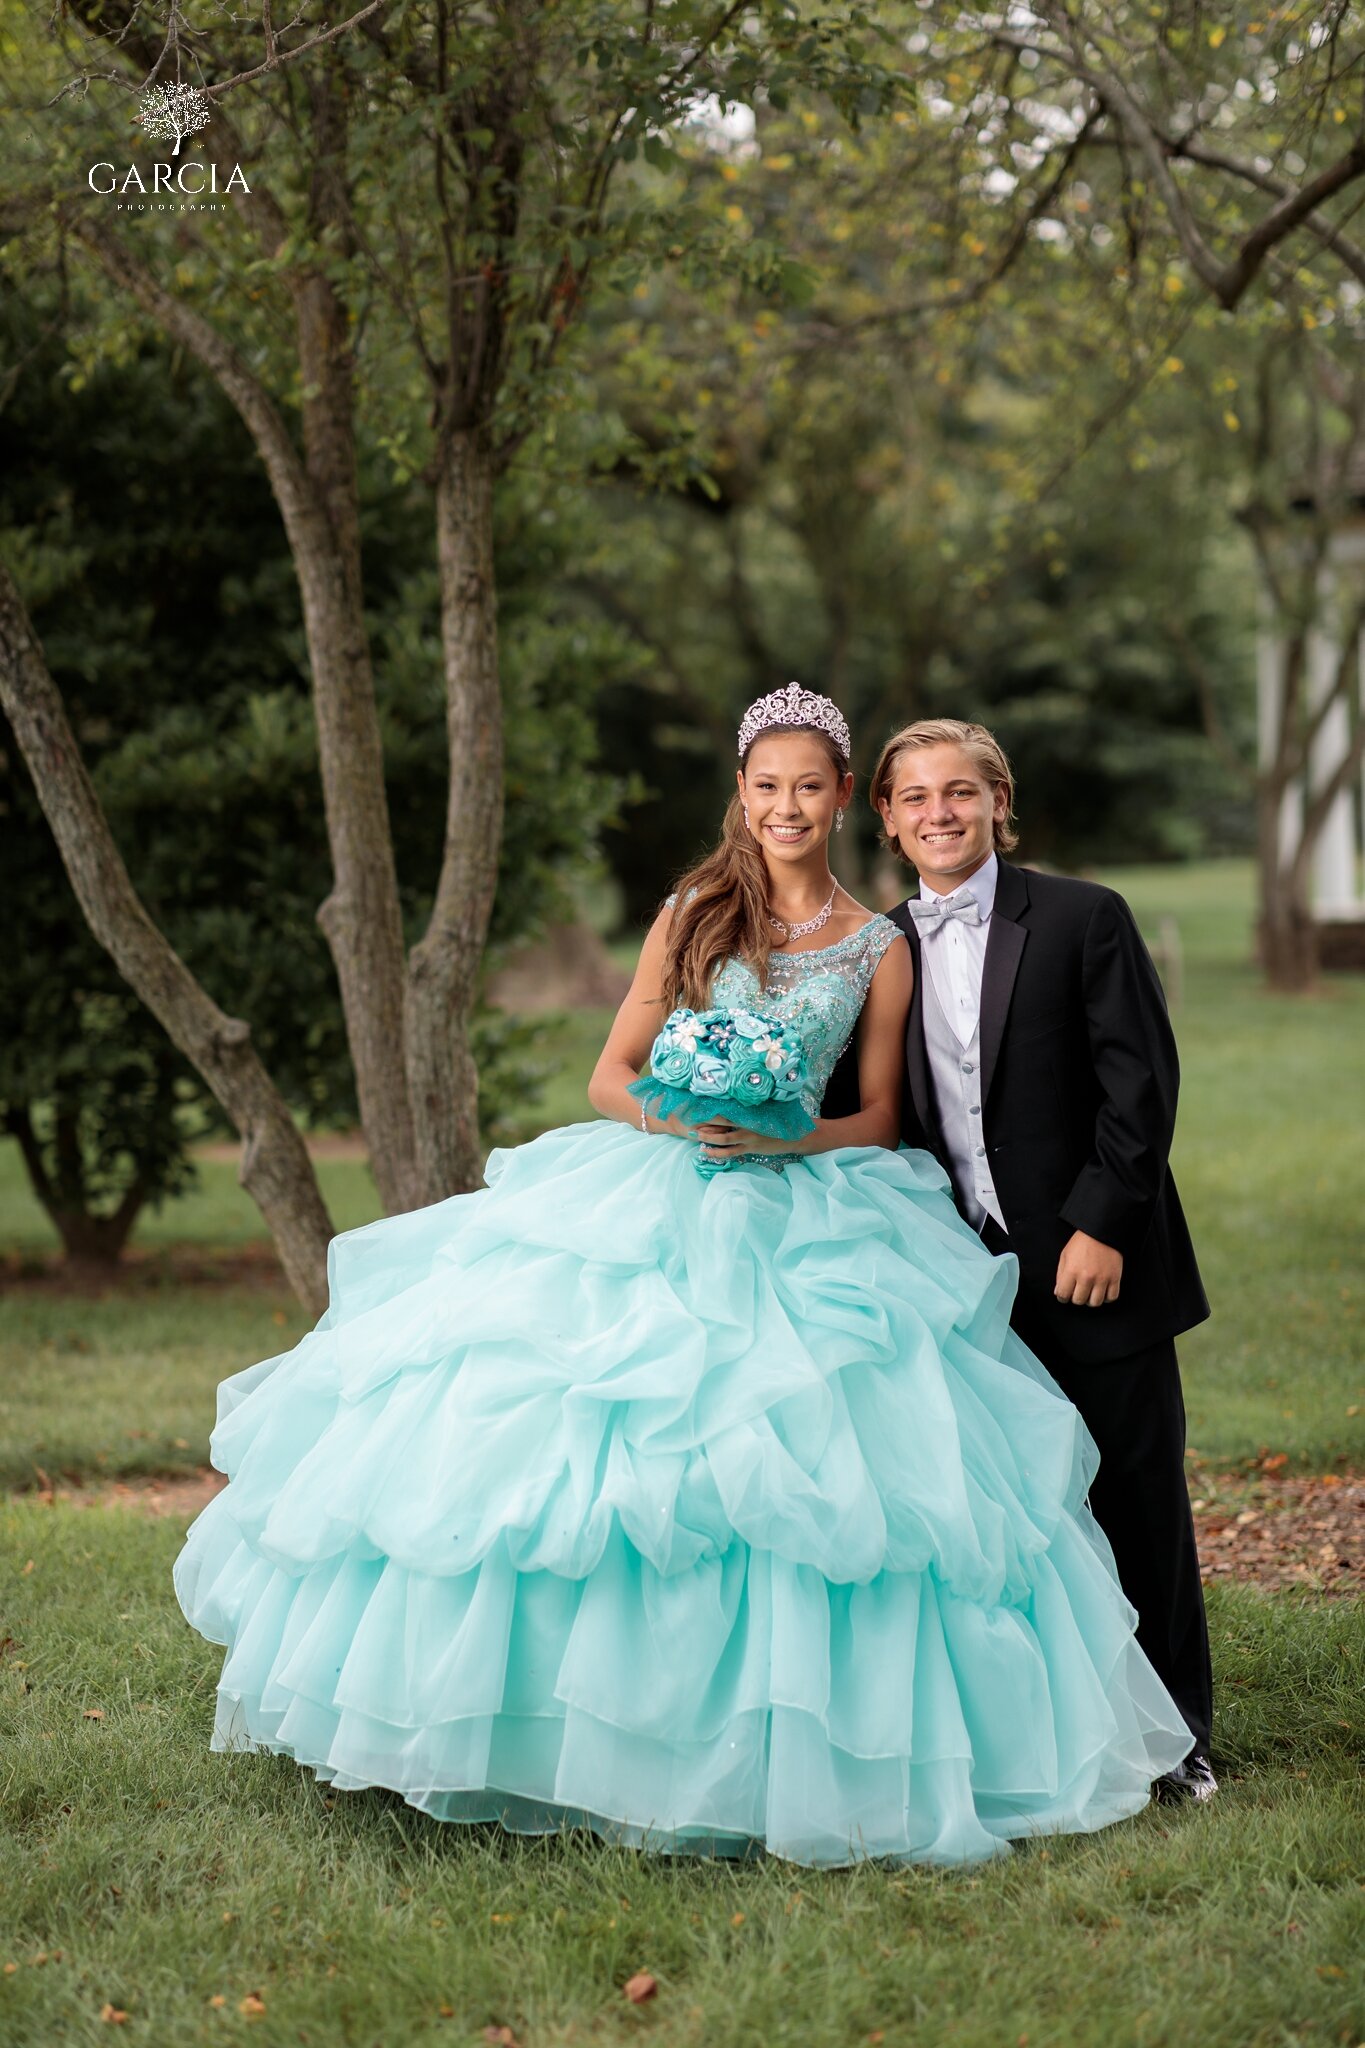 Taylor-Quince-Garcia-Photography-9940.jpg